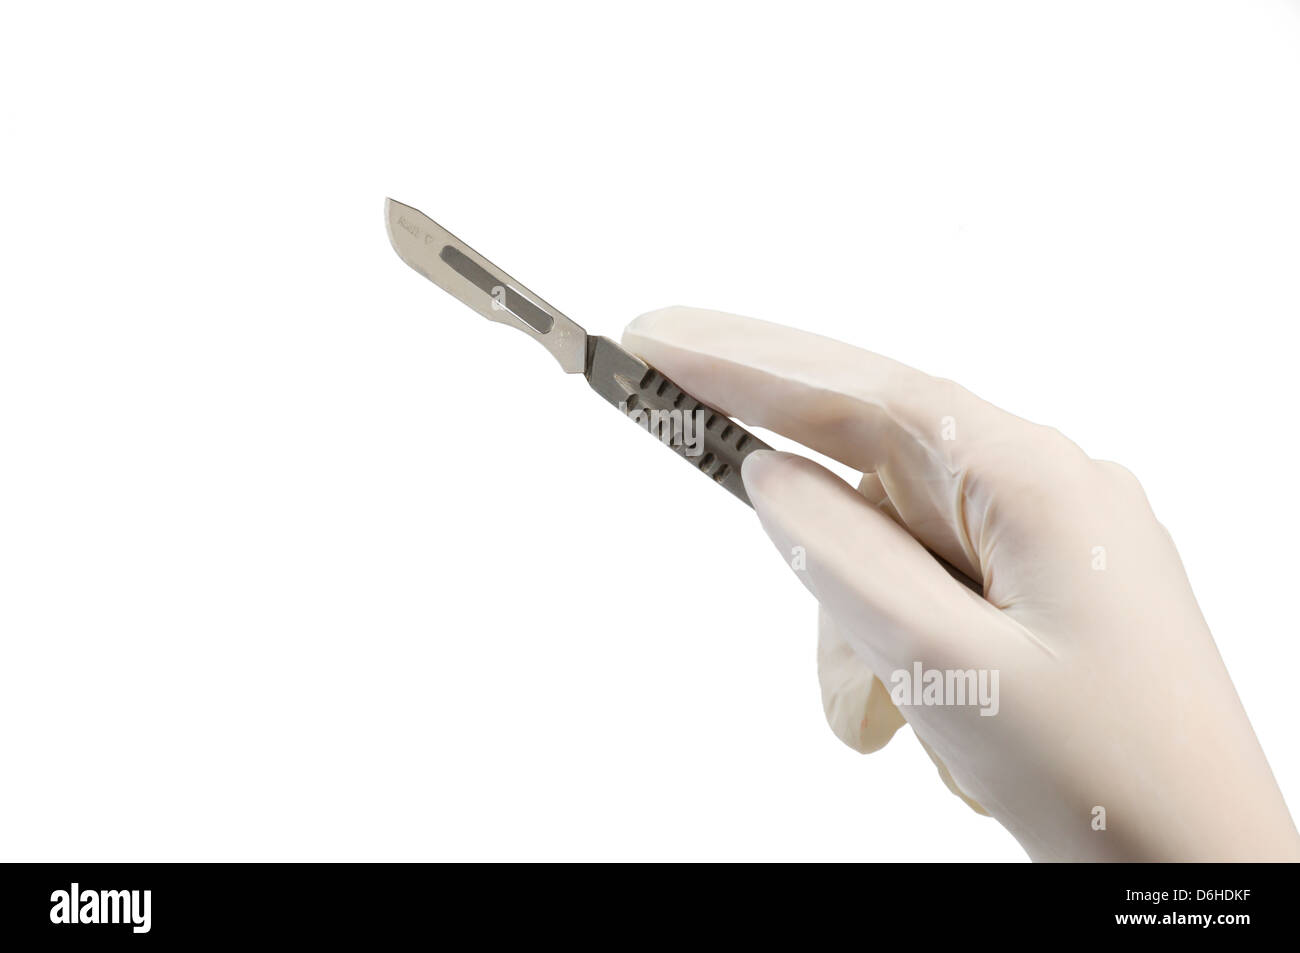 Scalpel blade Cut Out Stock Images & Pictures - Page 3 - Alamy